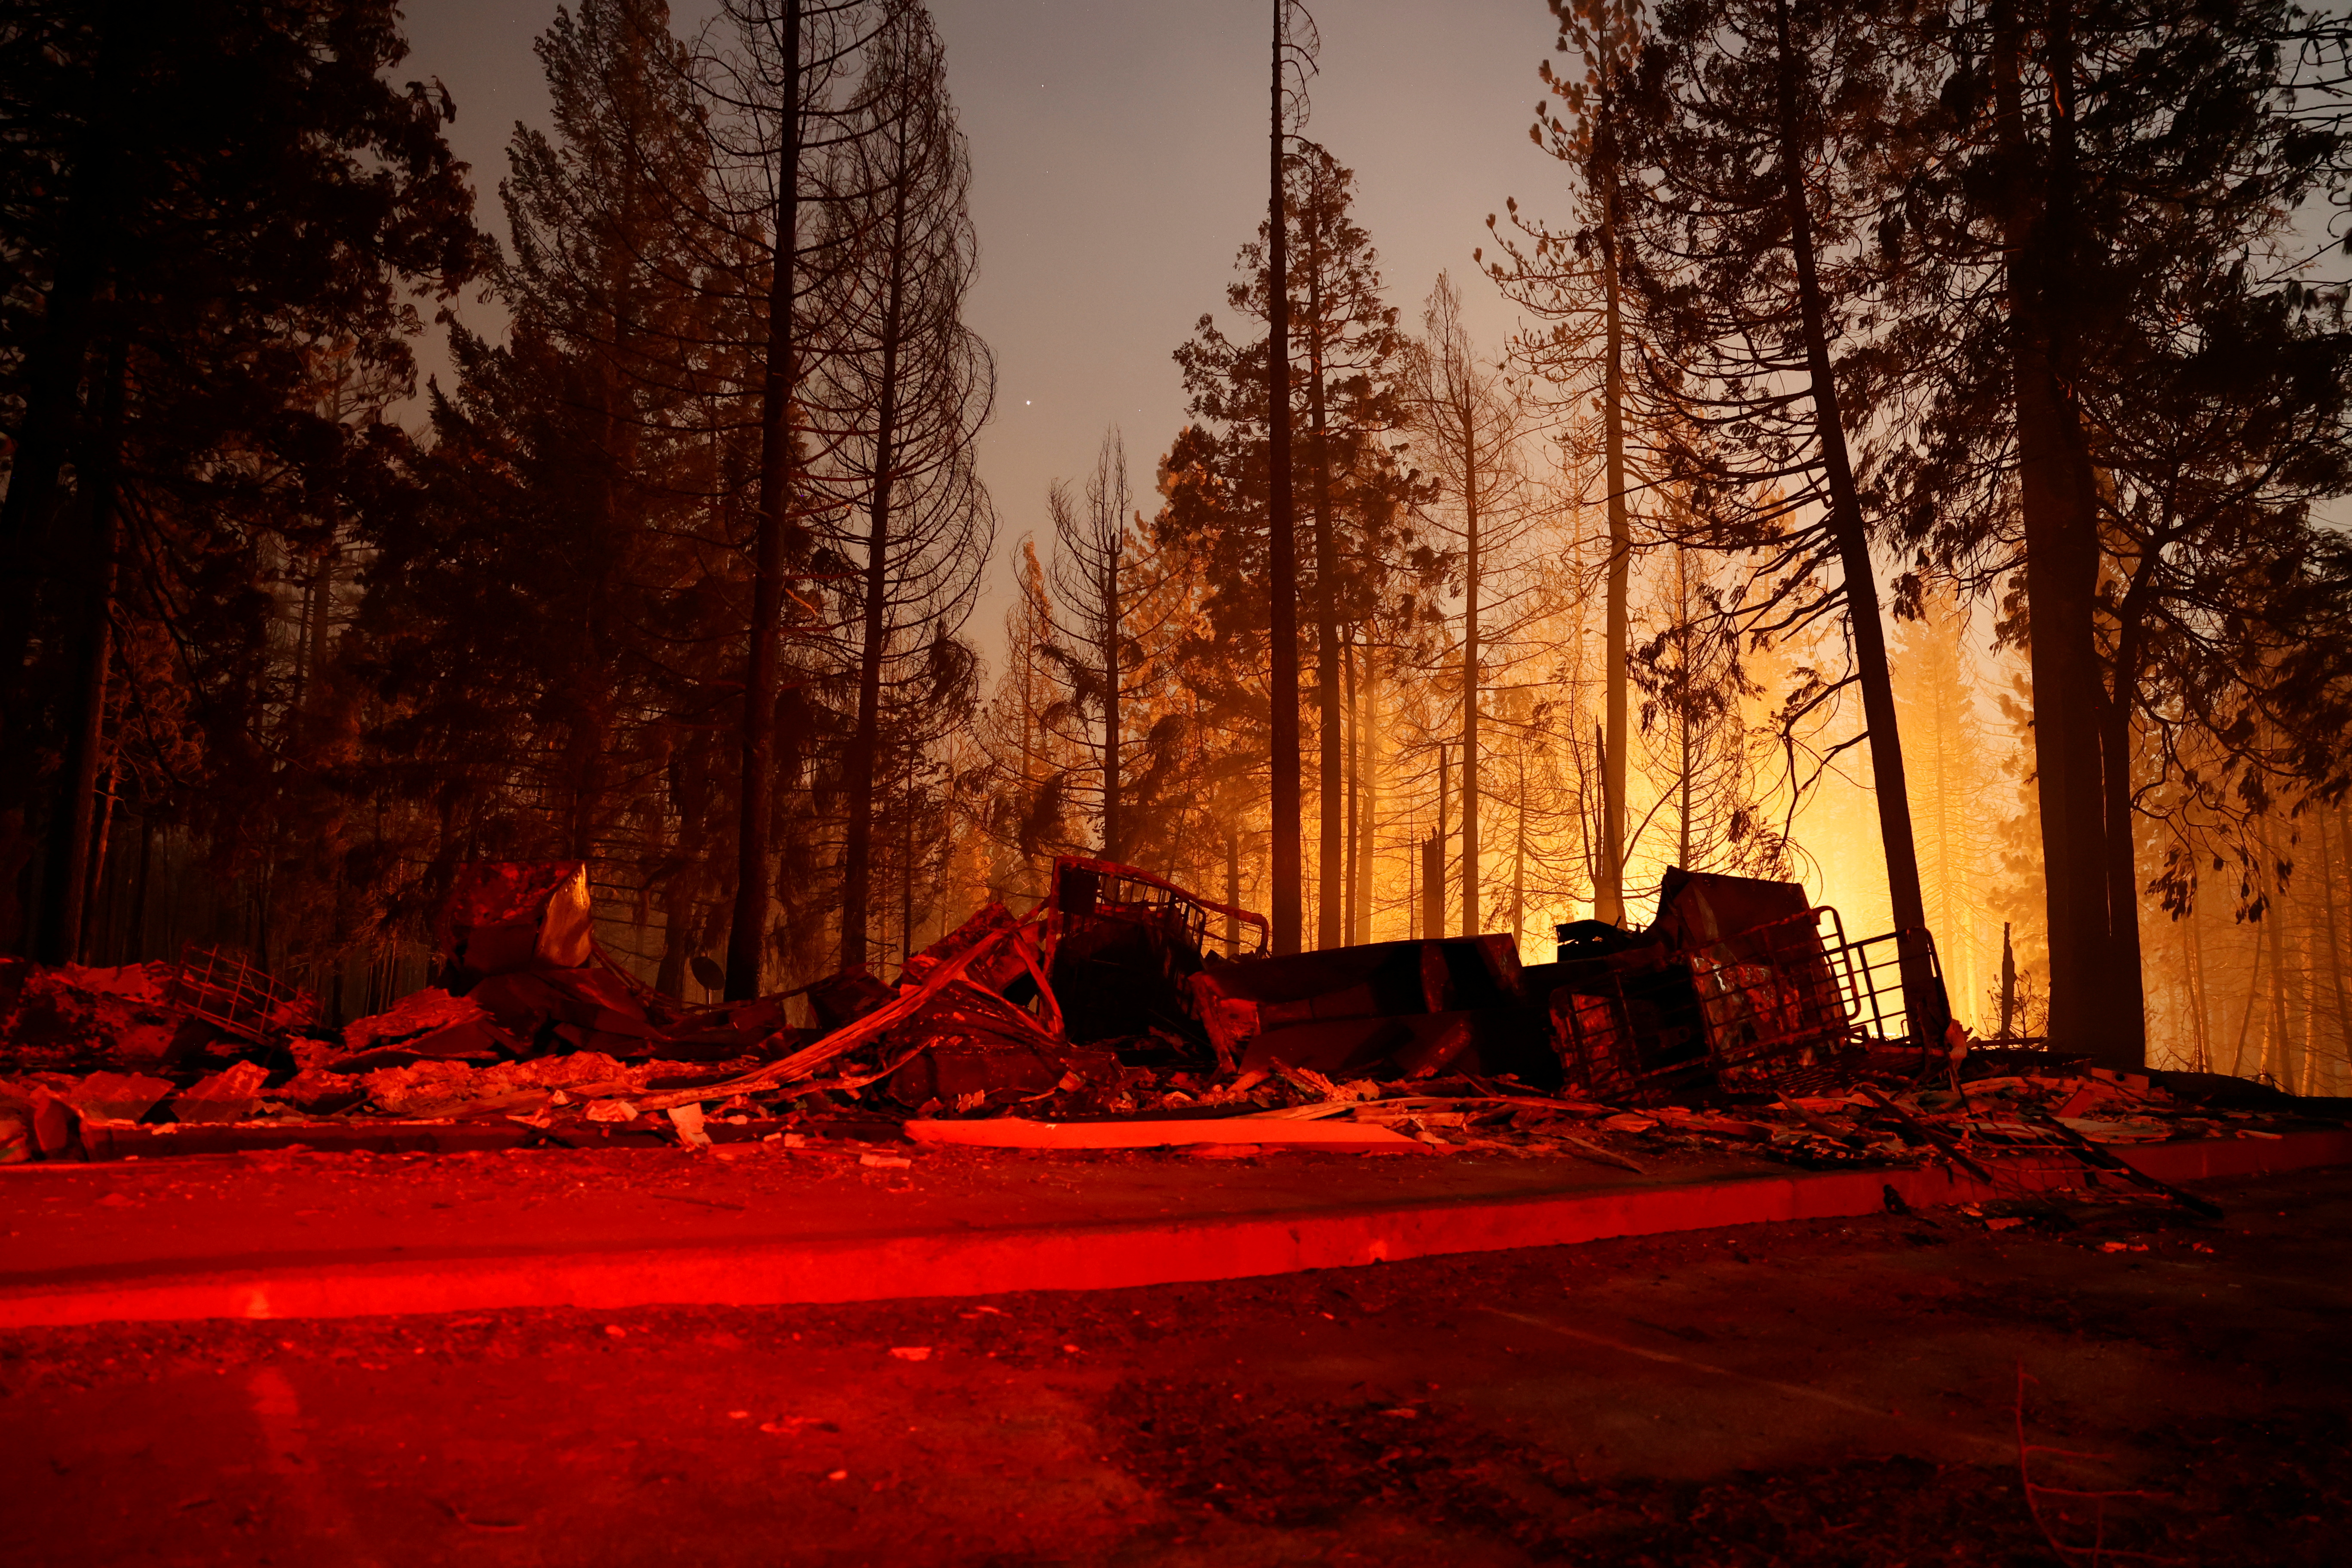 Burnt debris is seen in Grizzly Flats, California, U.S. in the aftermath of Caldor Fire, August 17, 2021. REUTERS/Fred Greaves